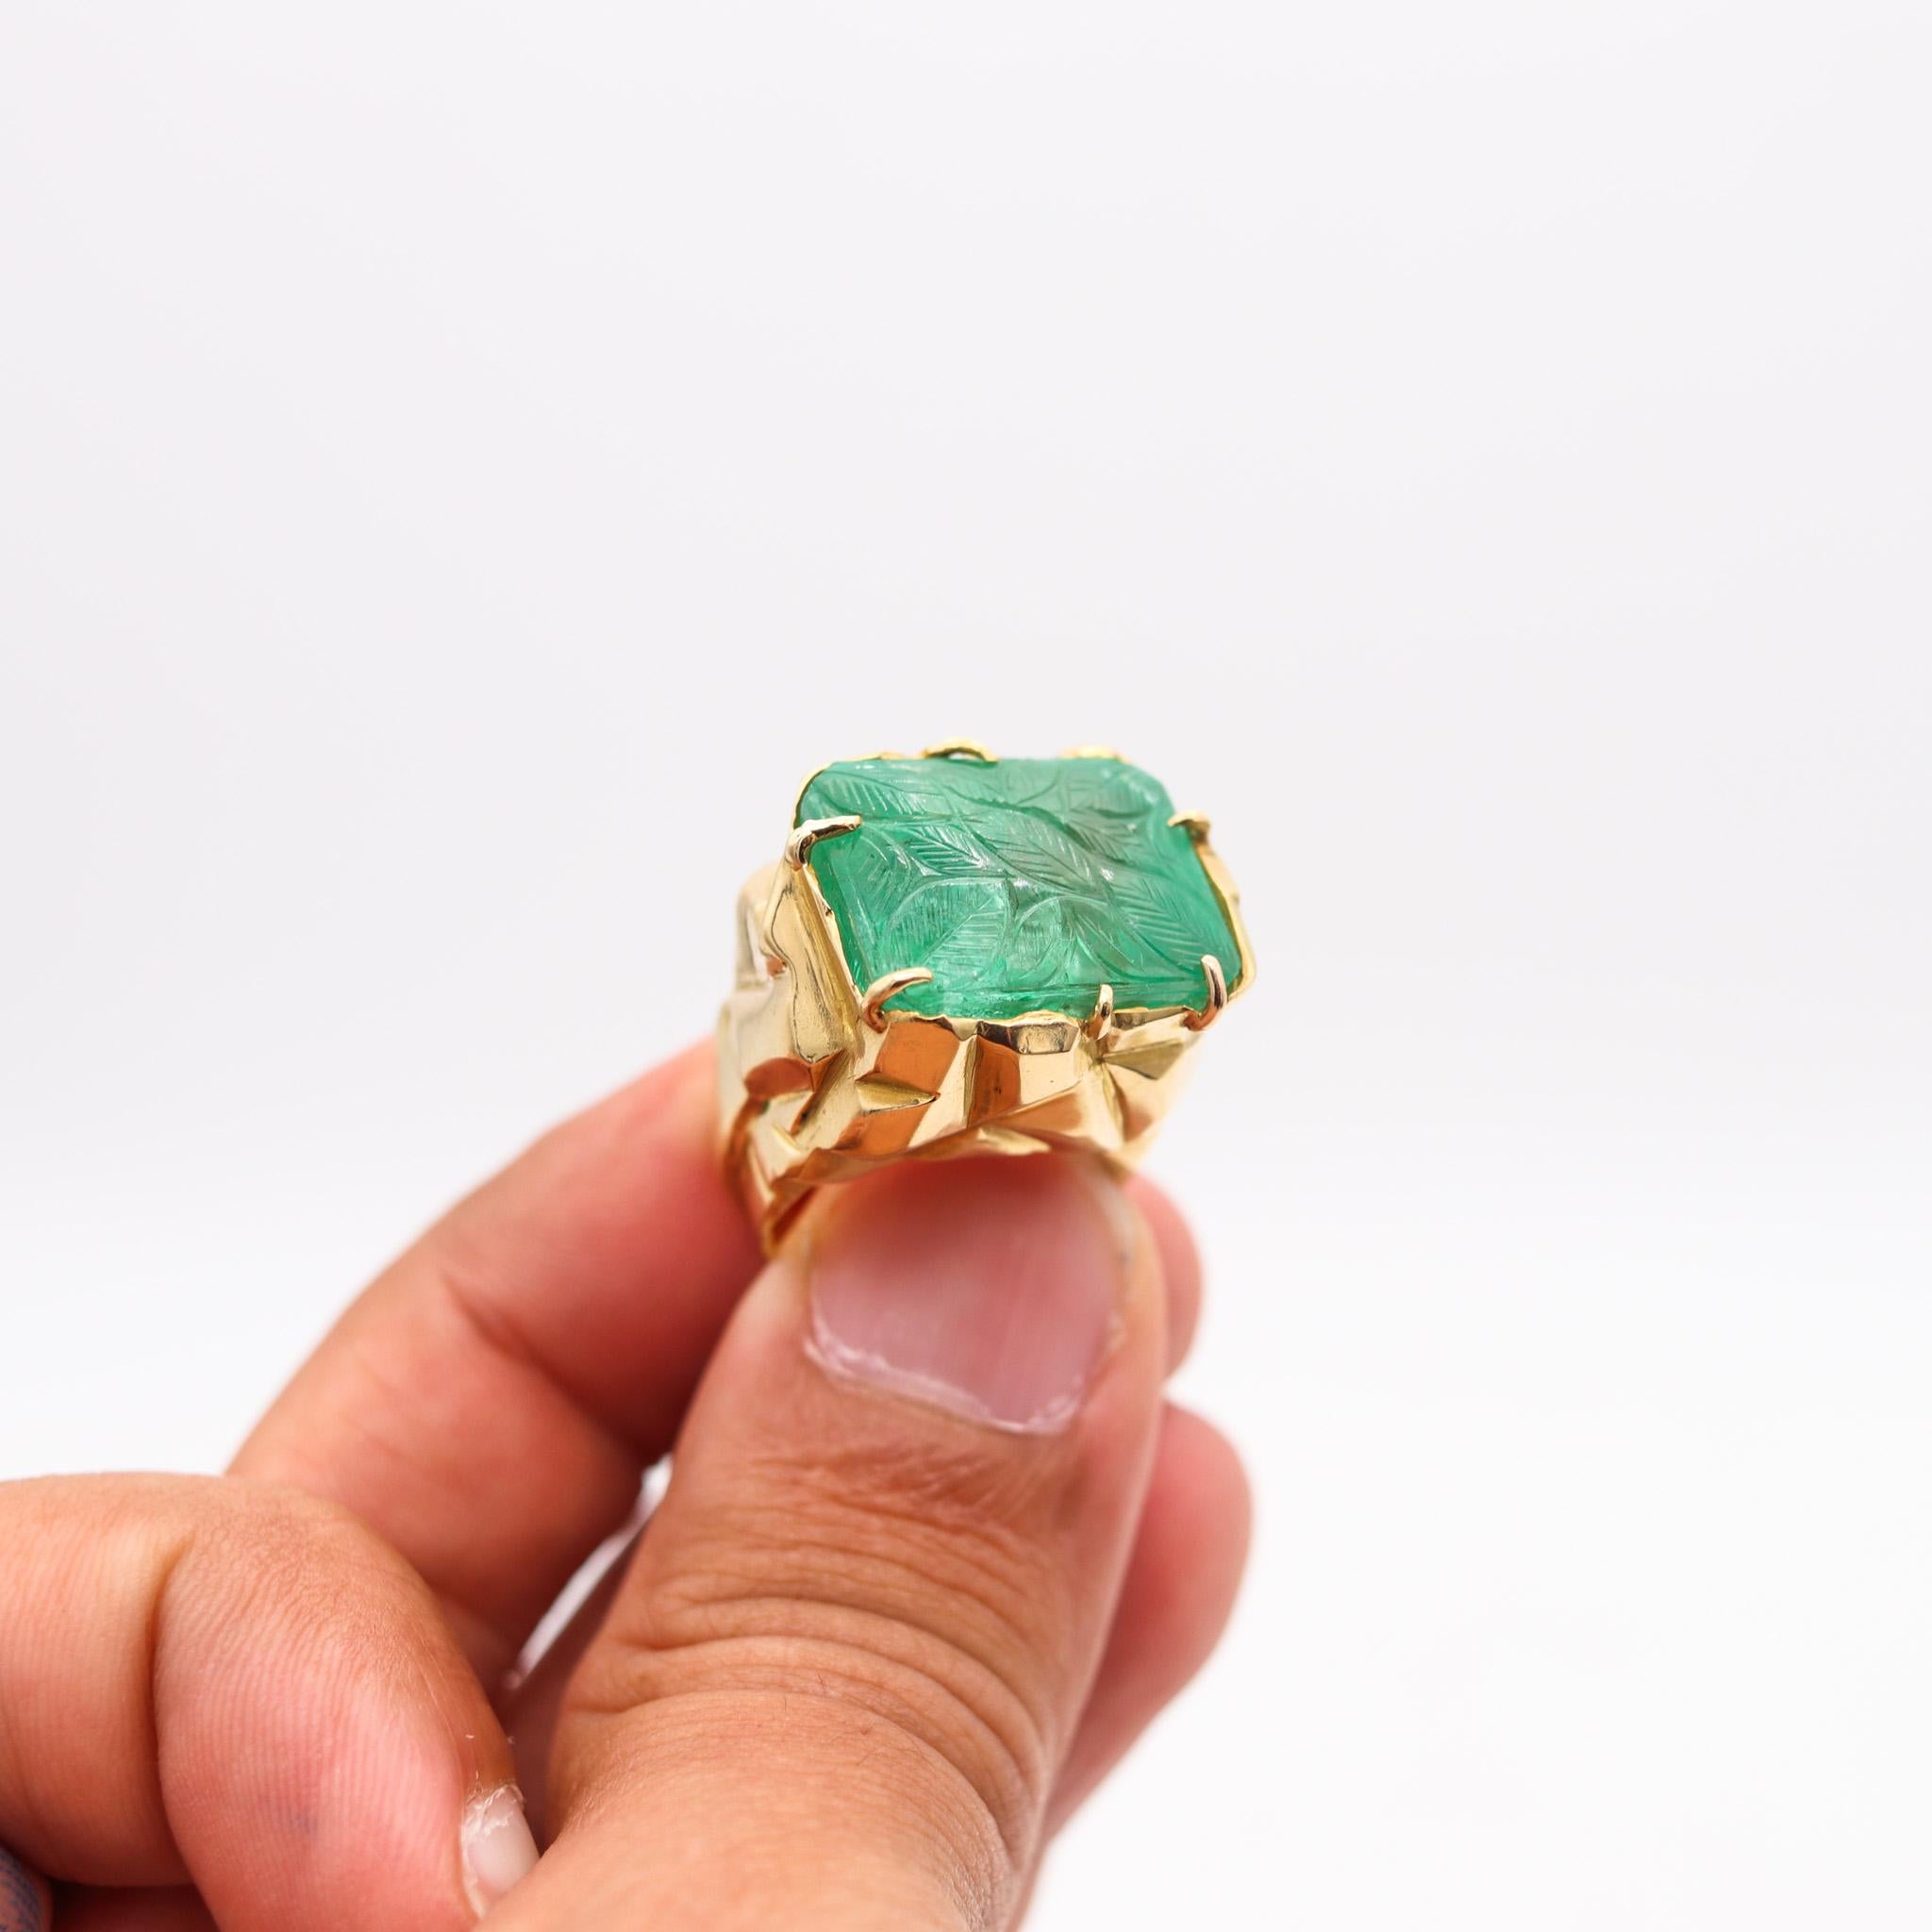 Arthur King 1970 Geometric Sculptural Ring In 18Kt Gold With 12.45 Cts Emerald For Sale 1